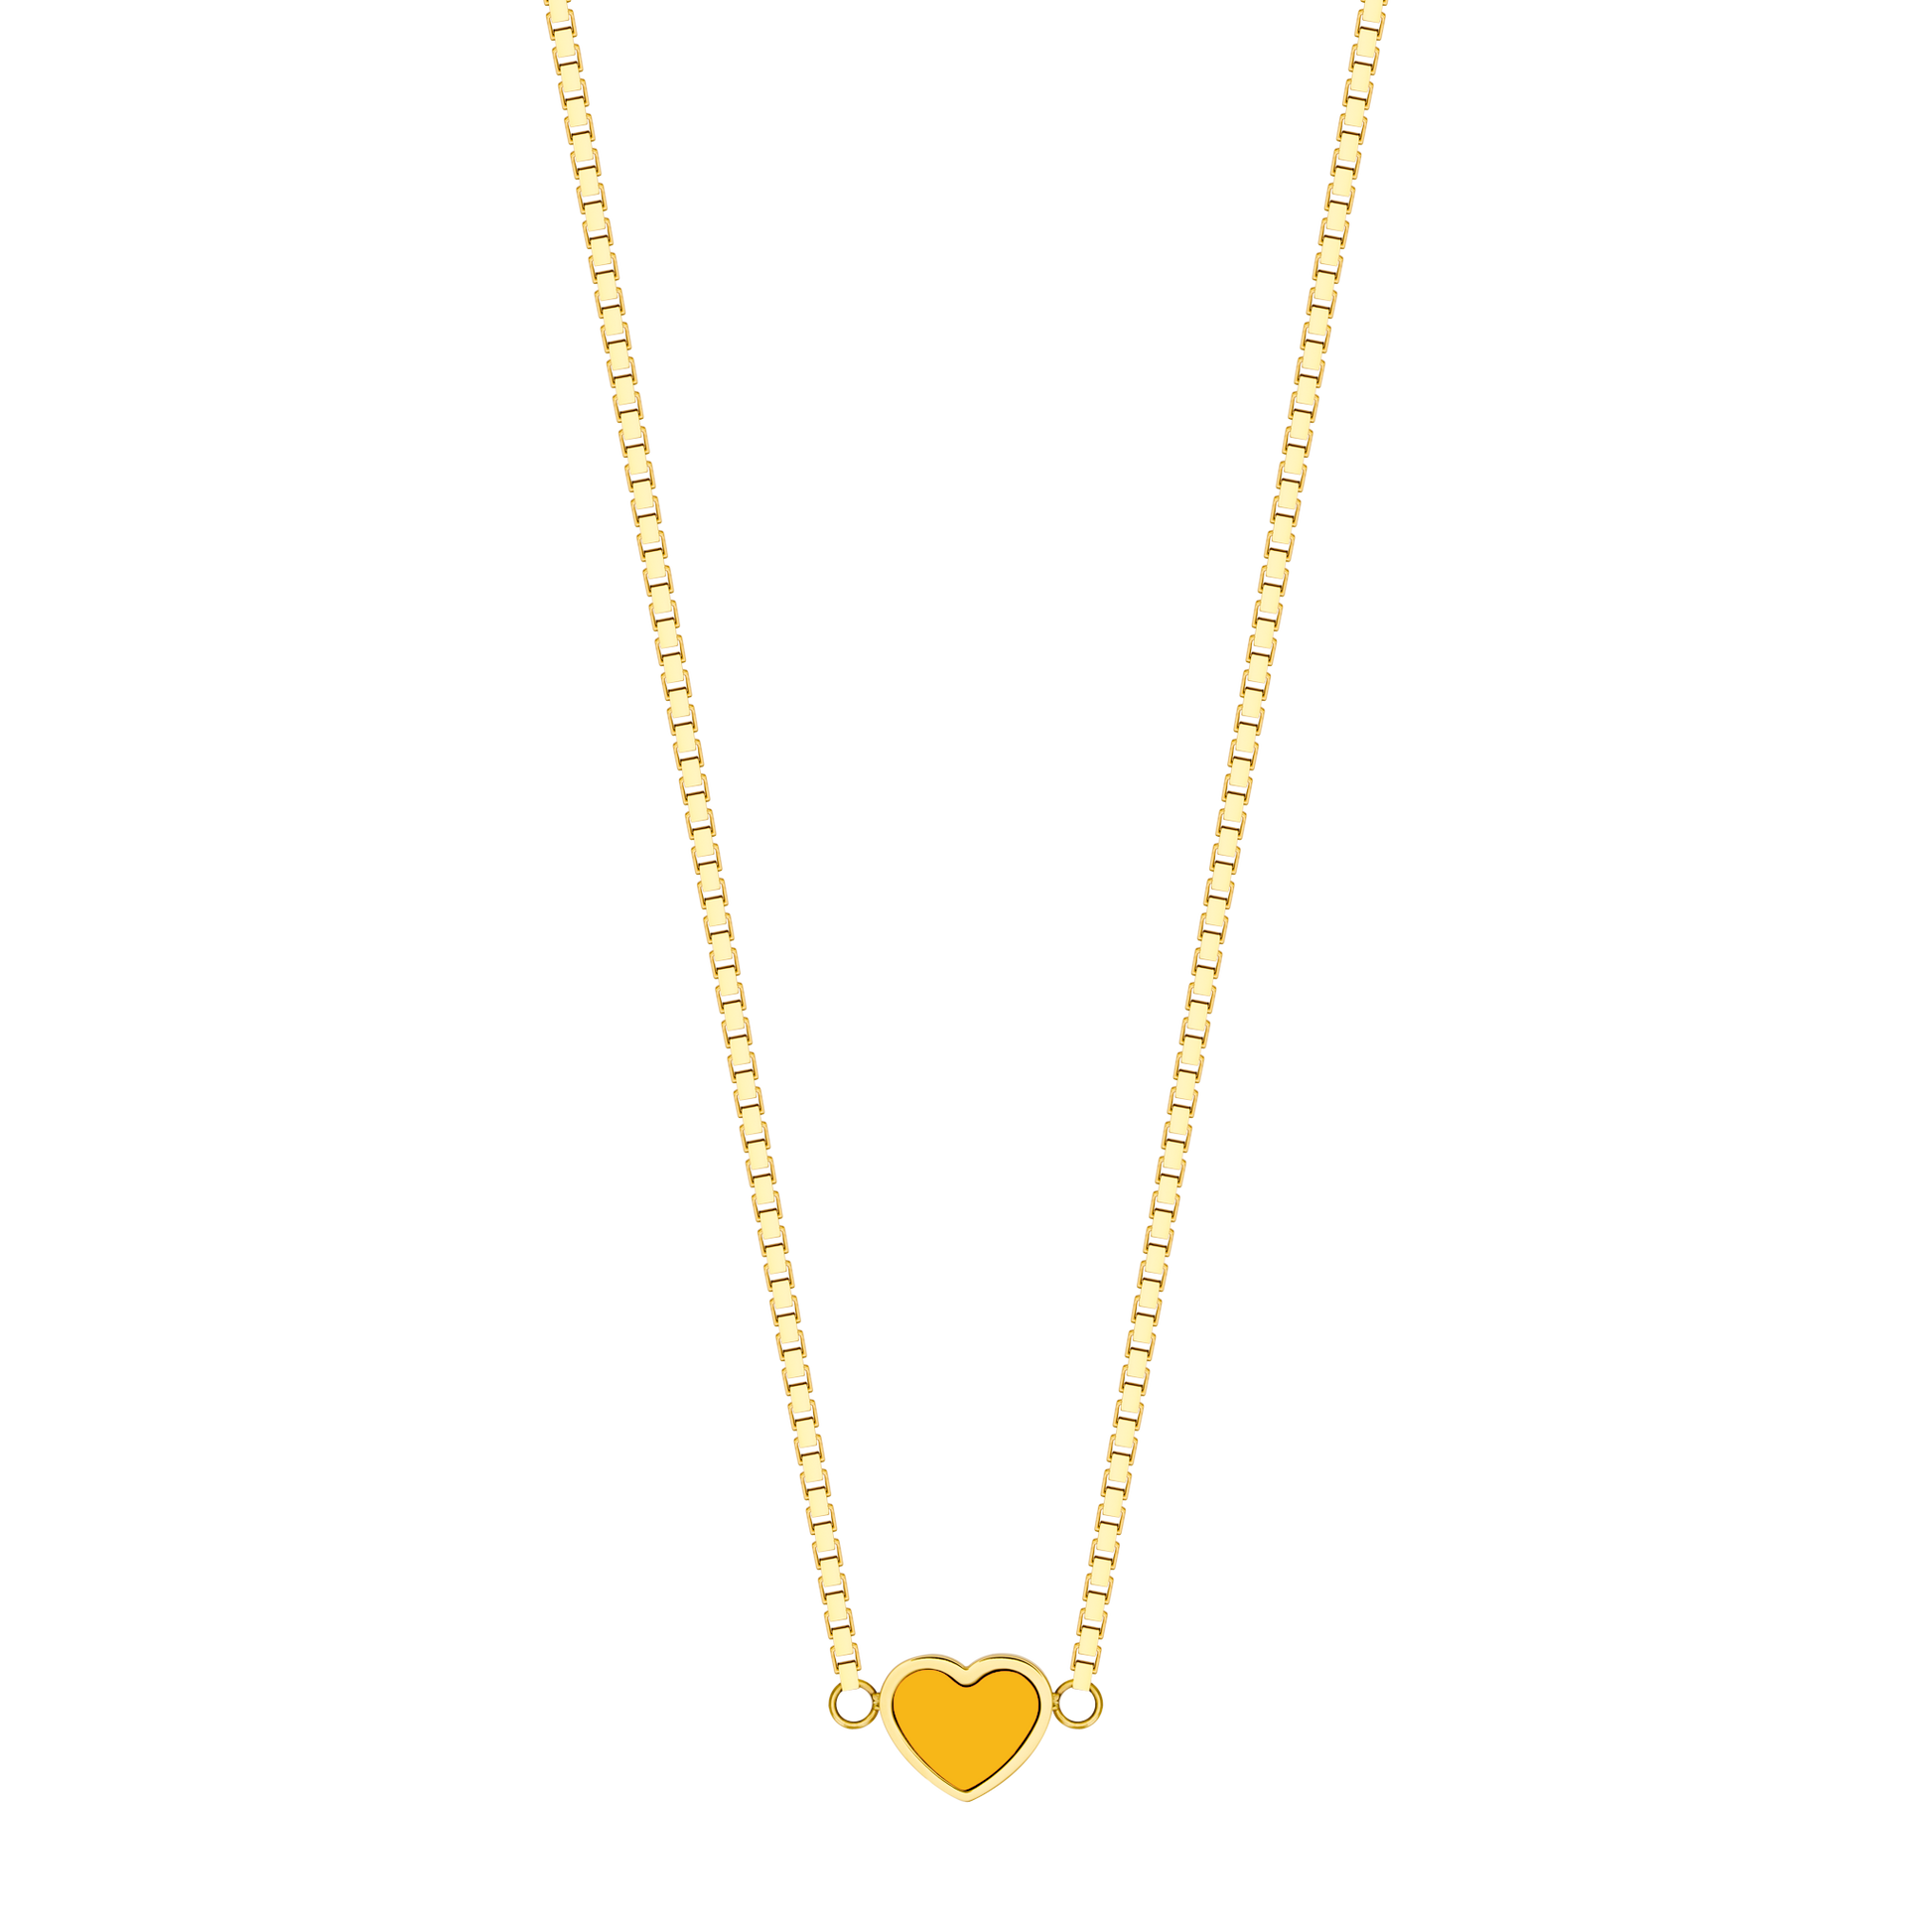 AMARE SPECTRA YELLOW CHIP NECKLACE